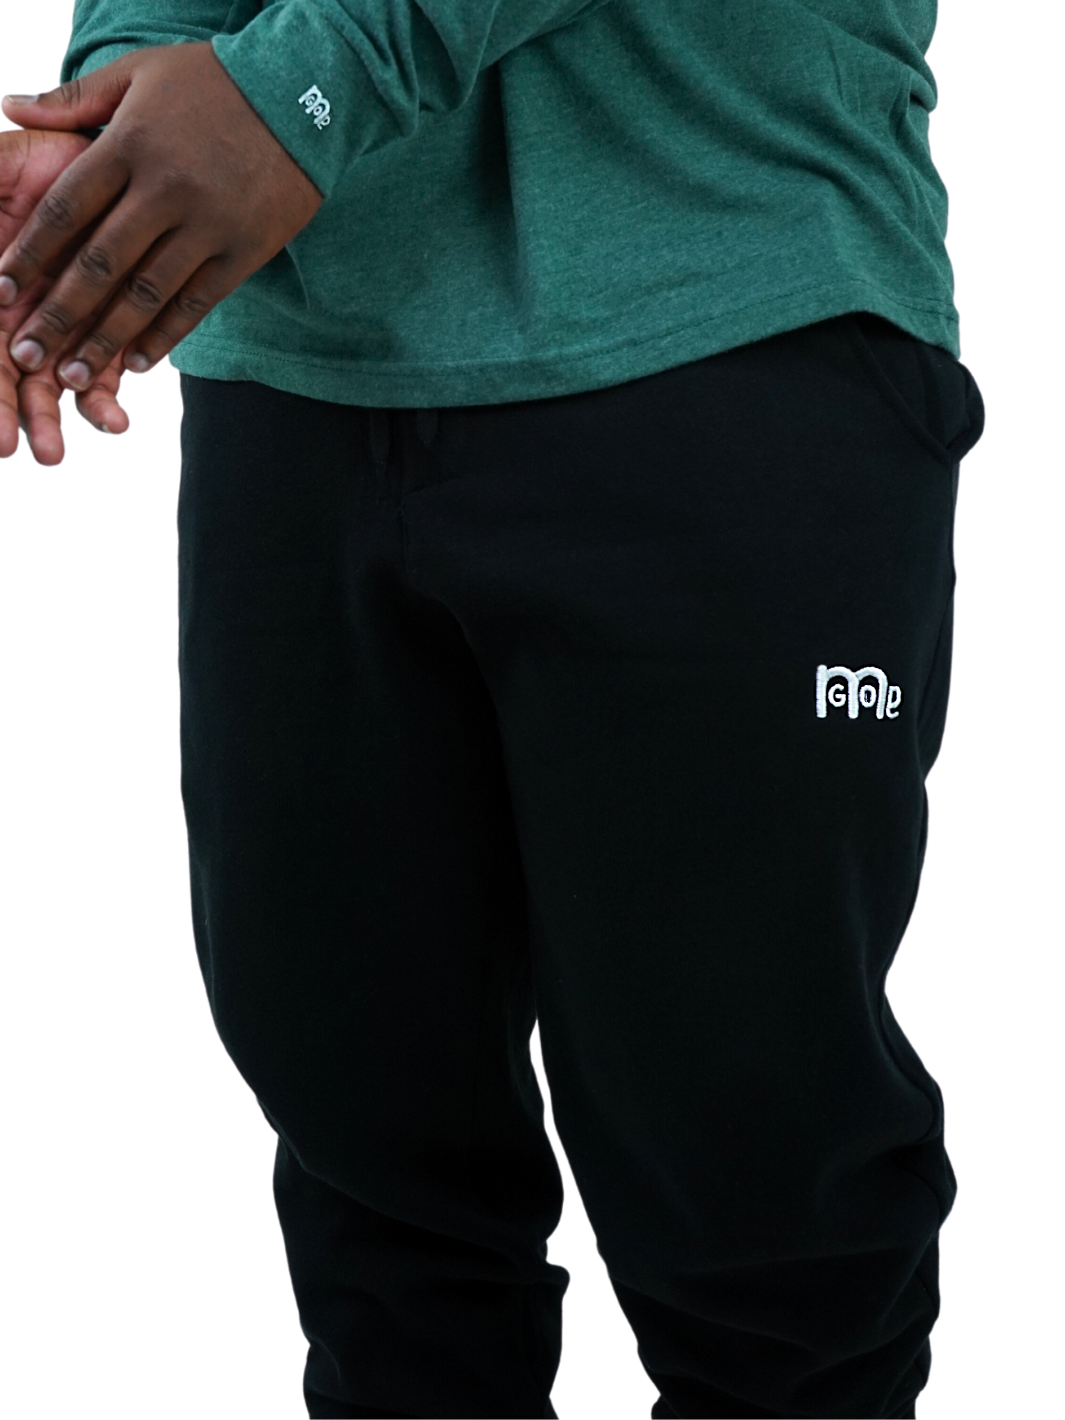 Experience the ultimate comfort in Men's joggers with GODinme! Made with premium quality fabric, these Black GODinme sweat pants offer an elastic waistband for that perfectly relaxed fit. Featuring ribbing ankle cuffs, sewn eyelets, and the signature GODinme logo (in White) at left leg.